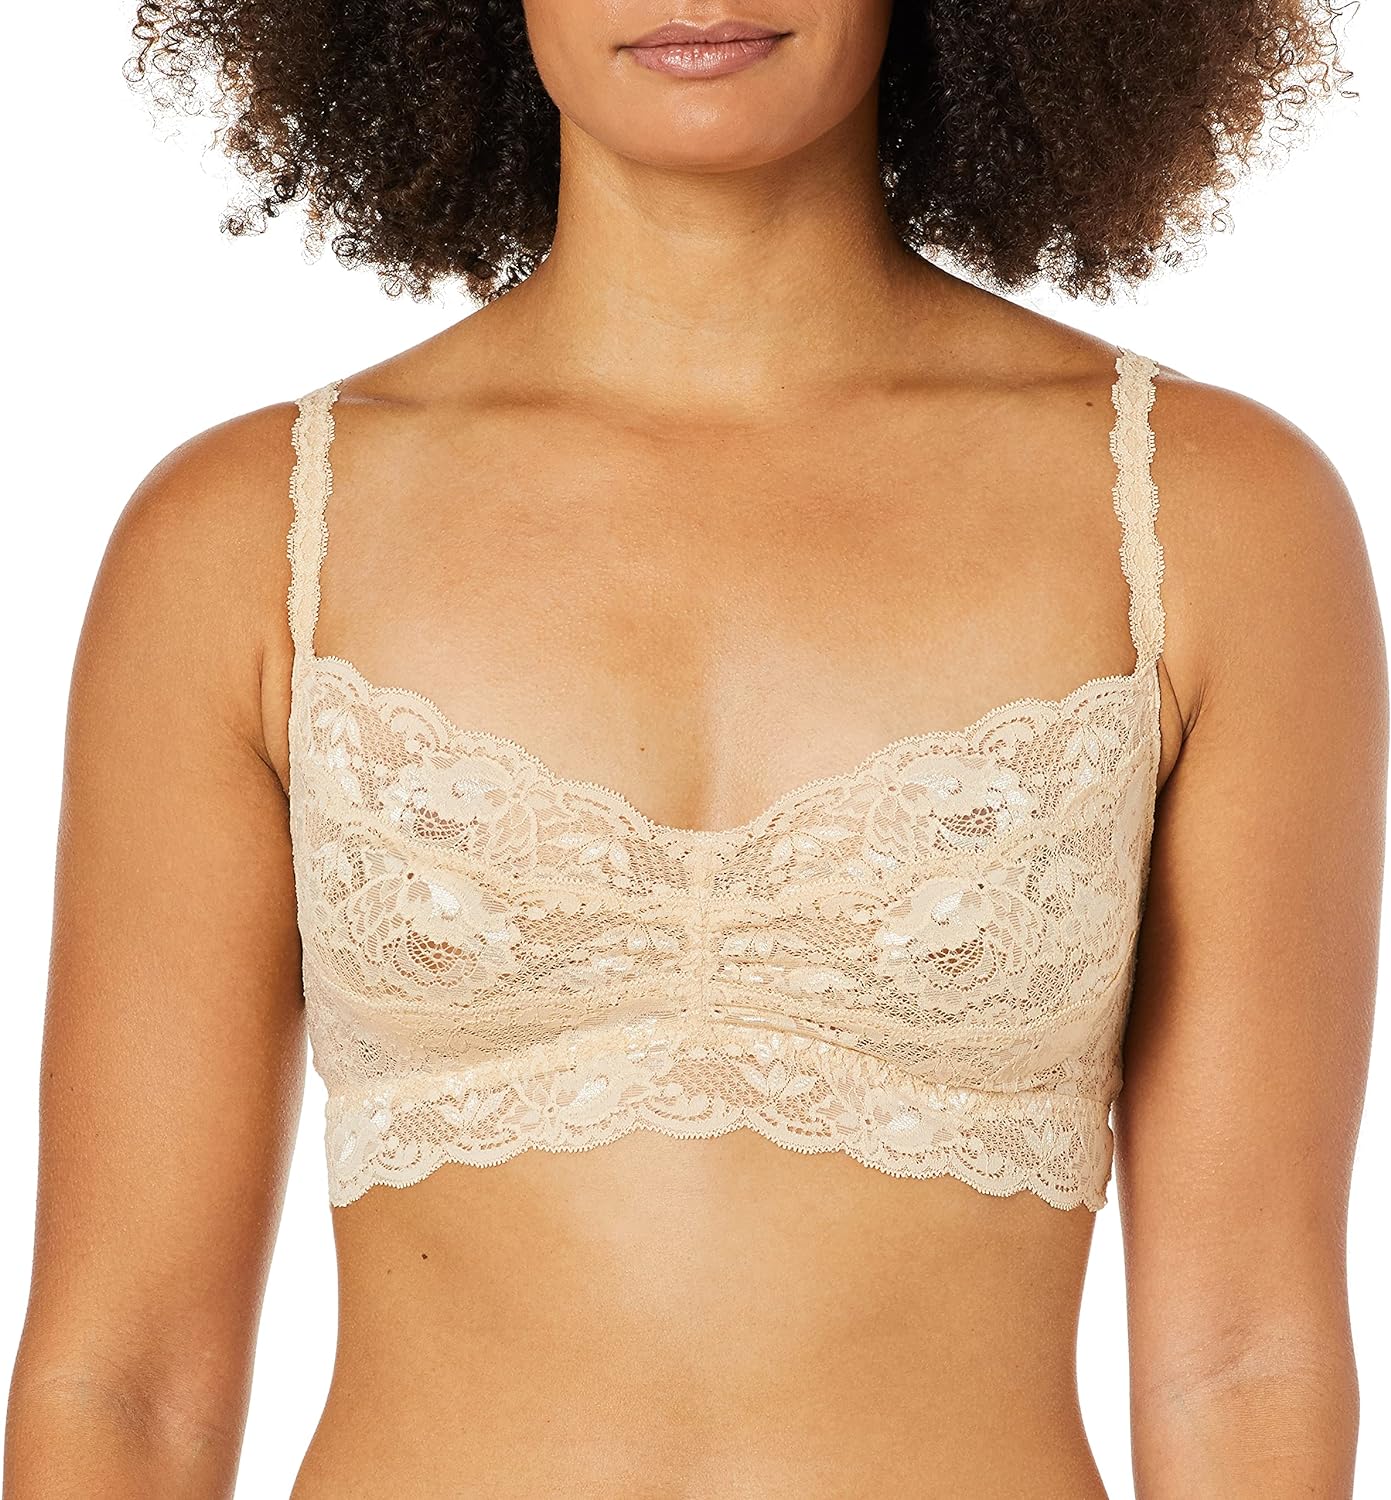 Best Cute Bralette for Small Busts